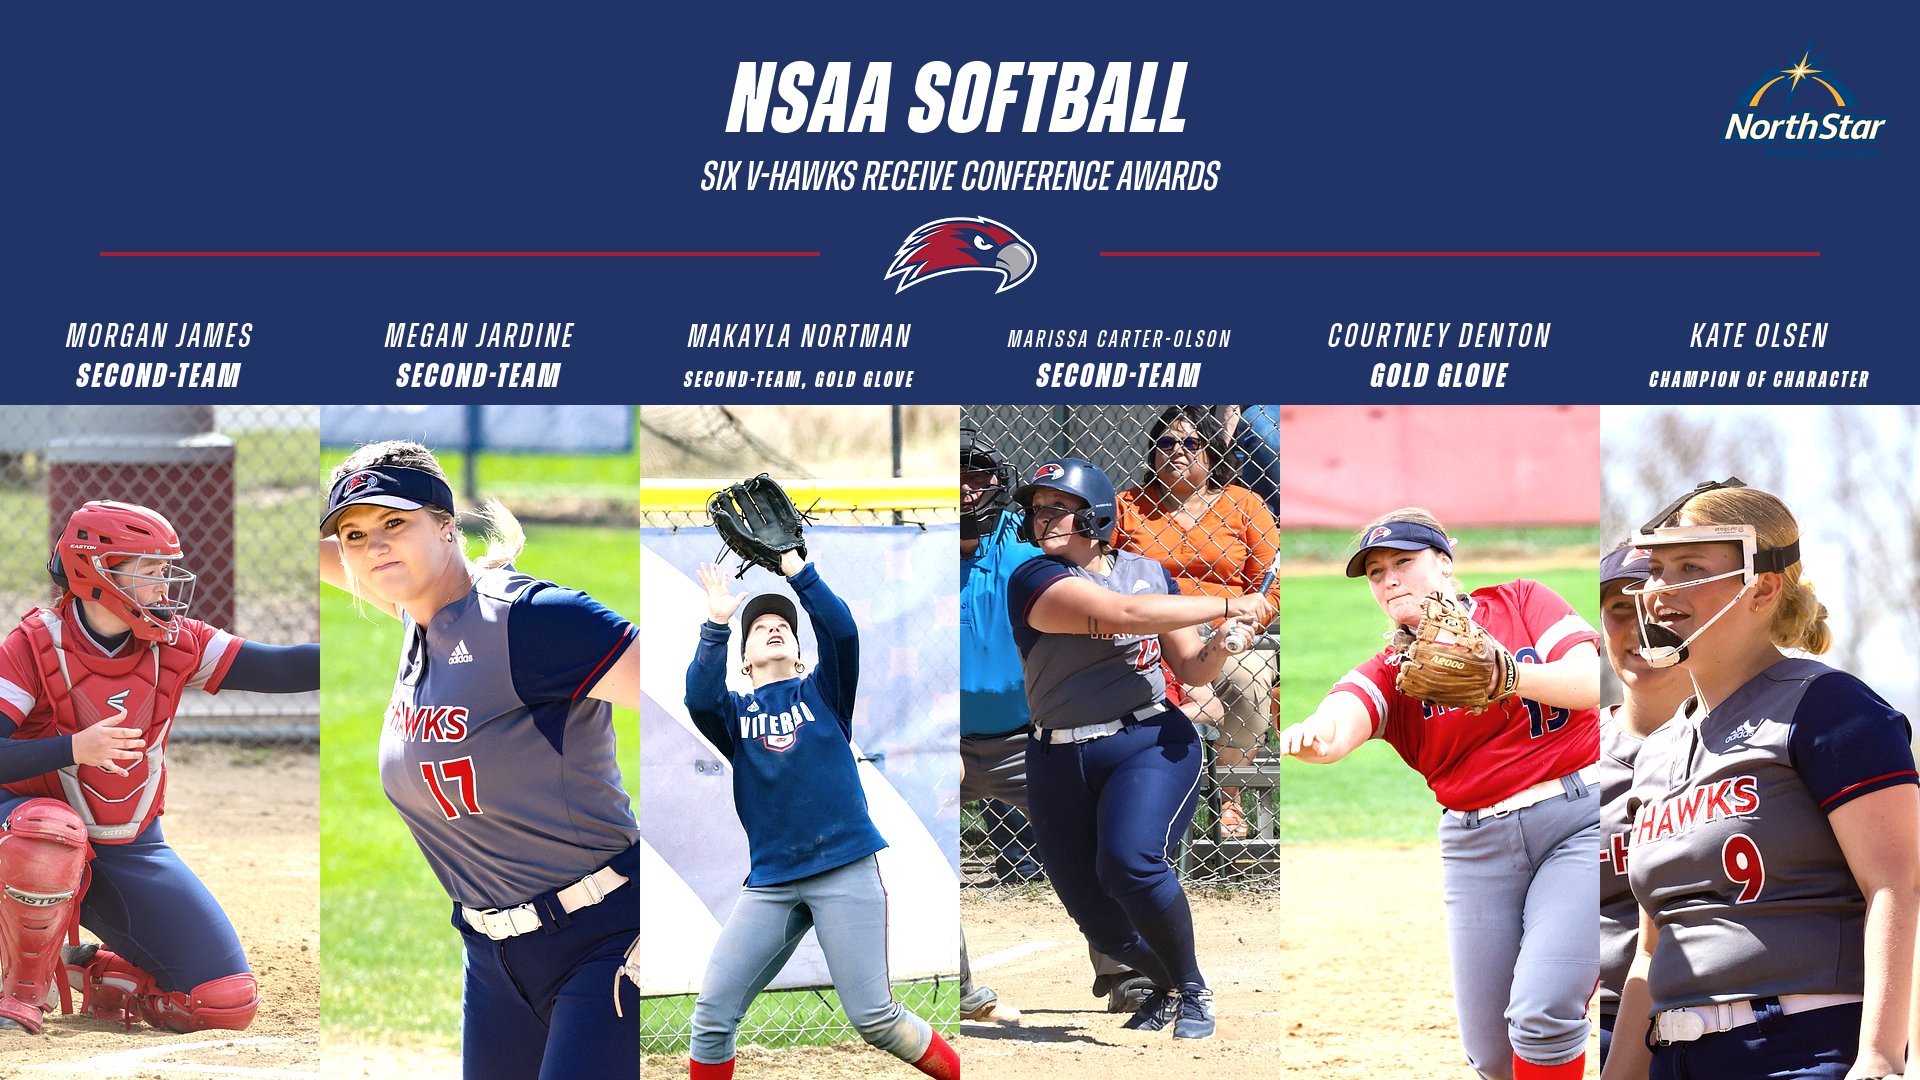 Six V-Hawks Earn All-Conference Accolades